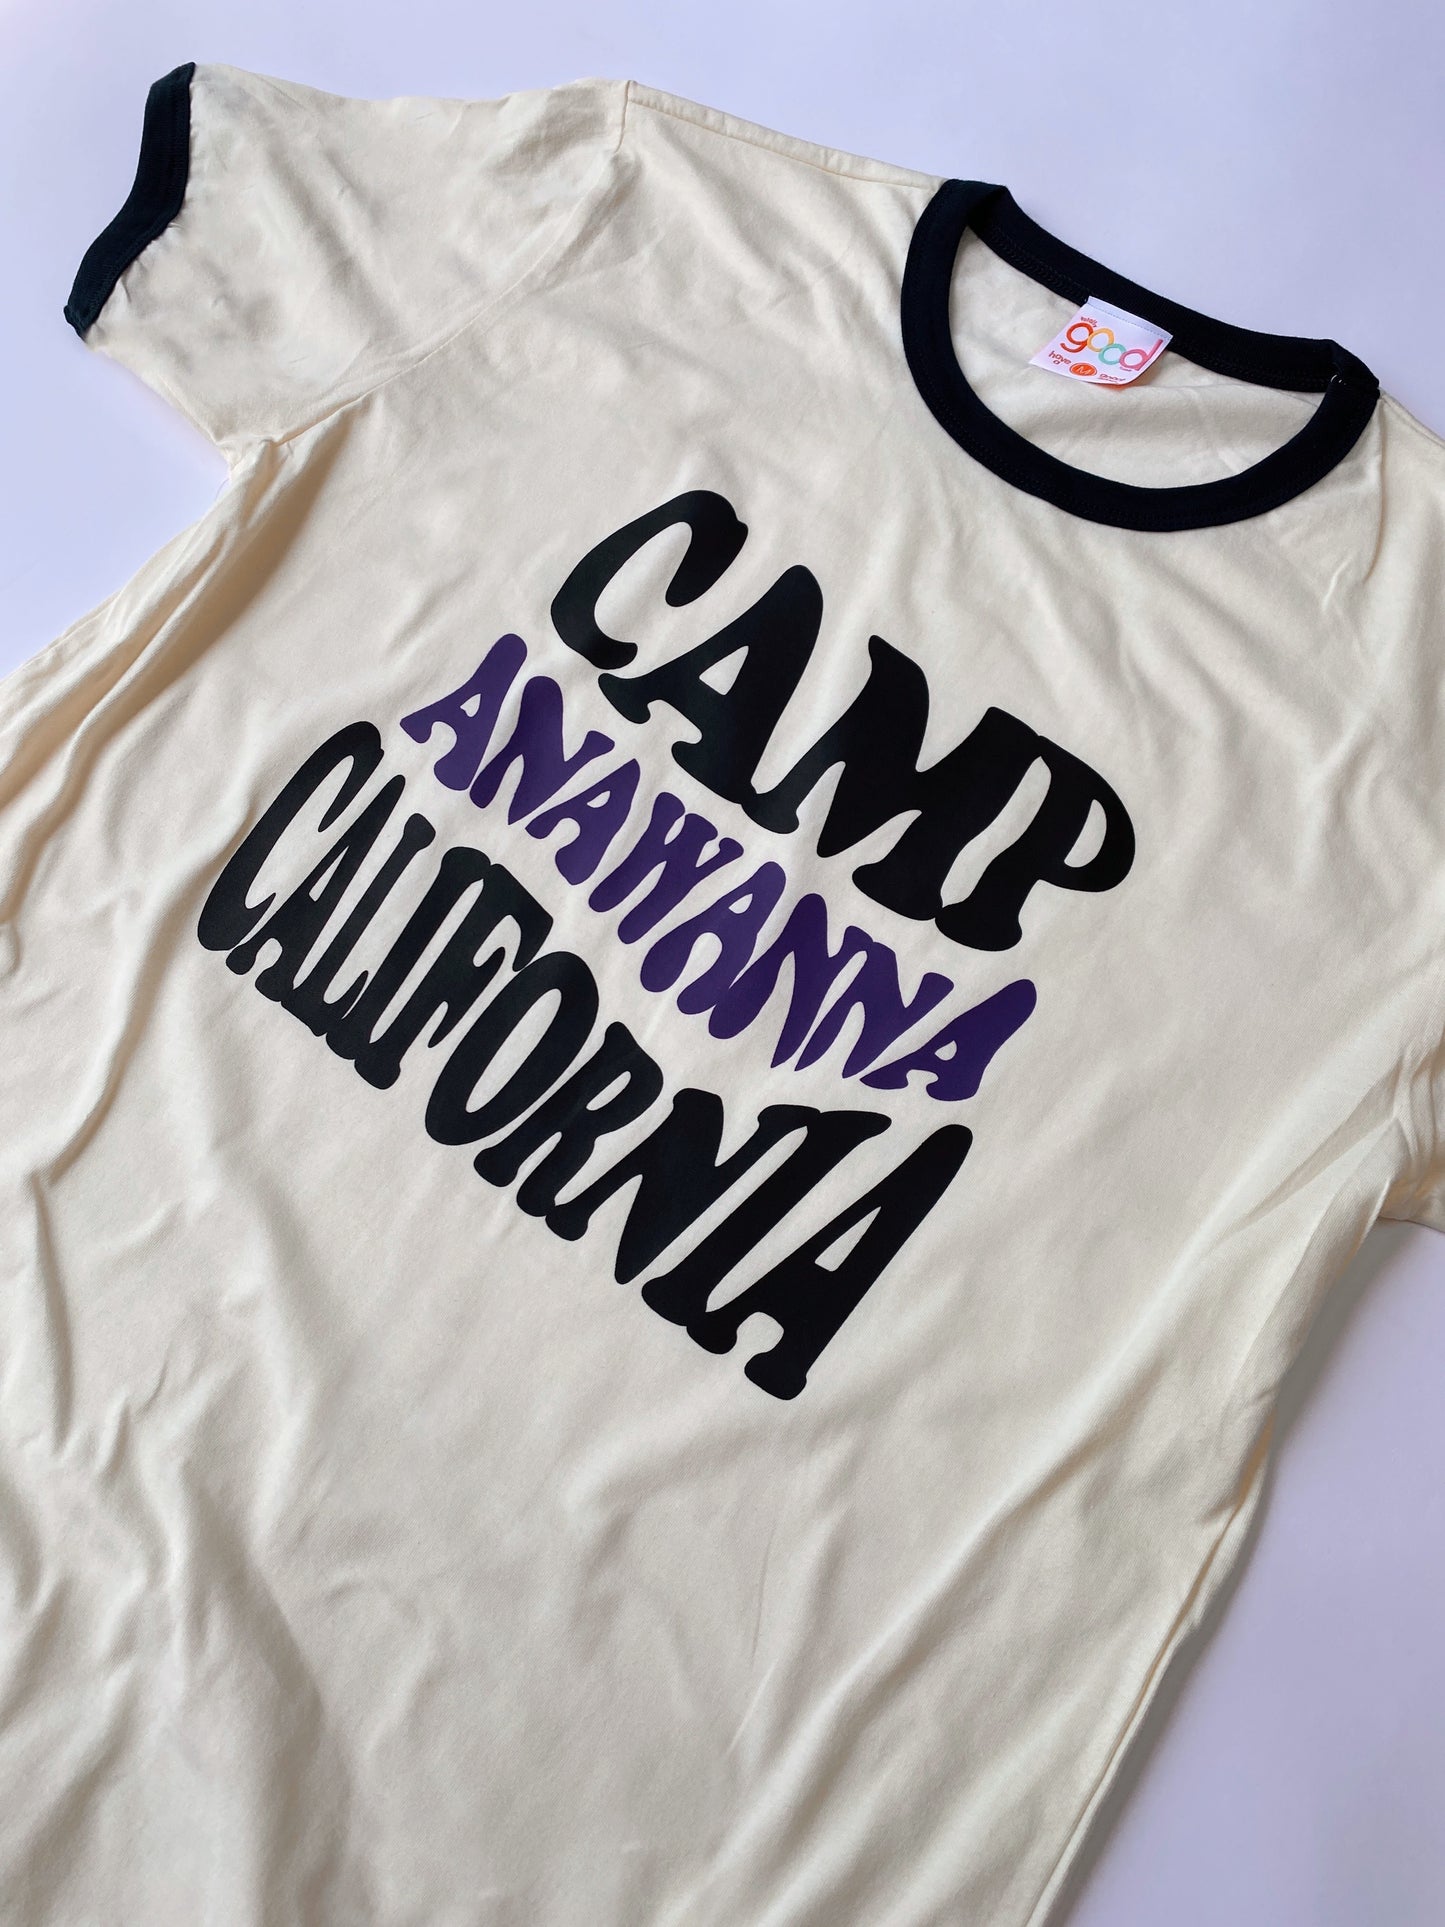 Salute Your Shorts Camp Anawanna Ringer Tee - Totally Good Time